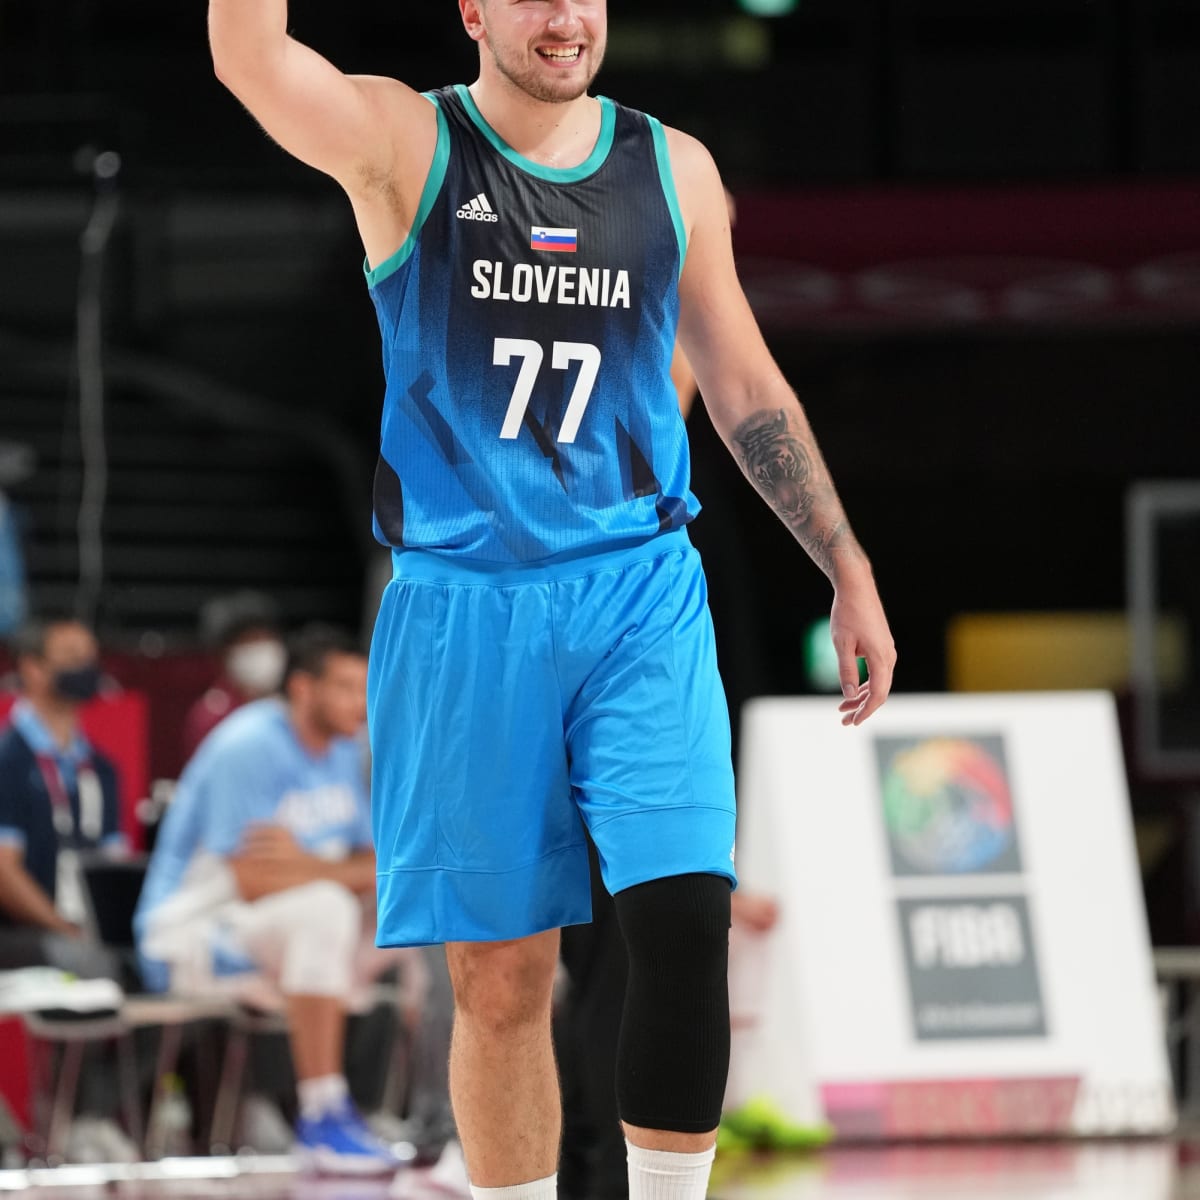 Luka Doncic explodes for 48 points in Olympic debut as Slovenia